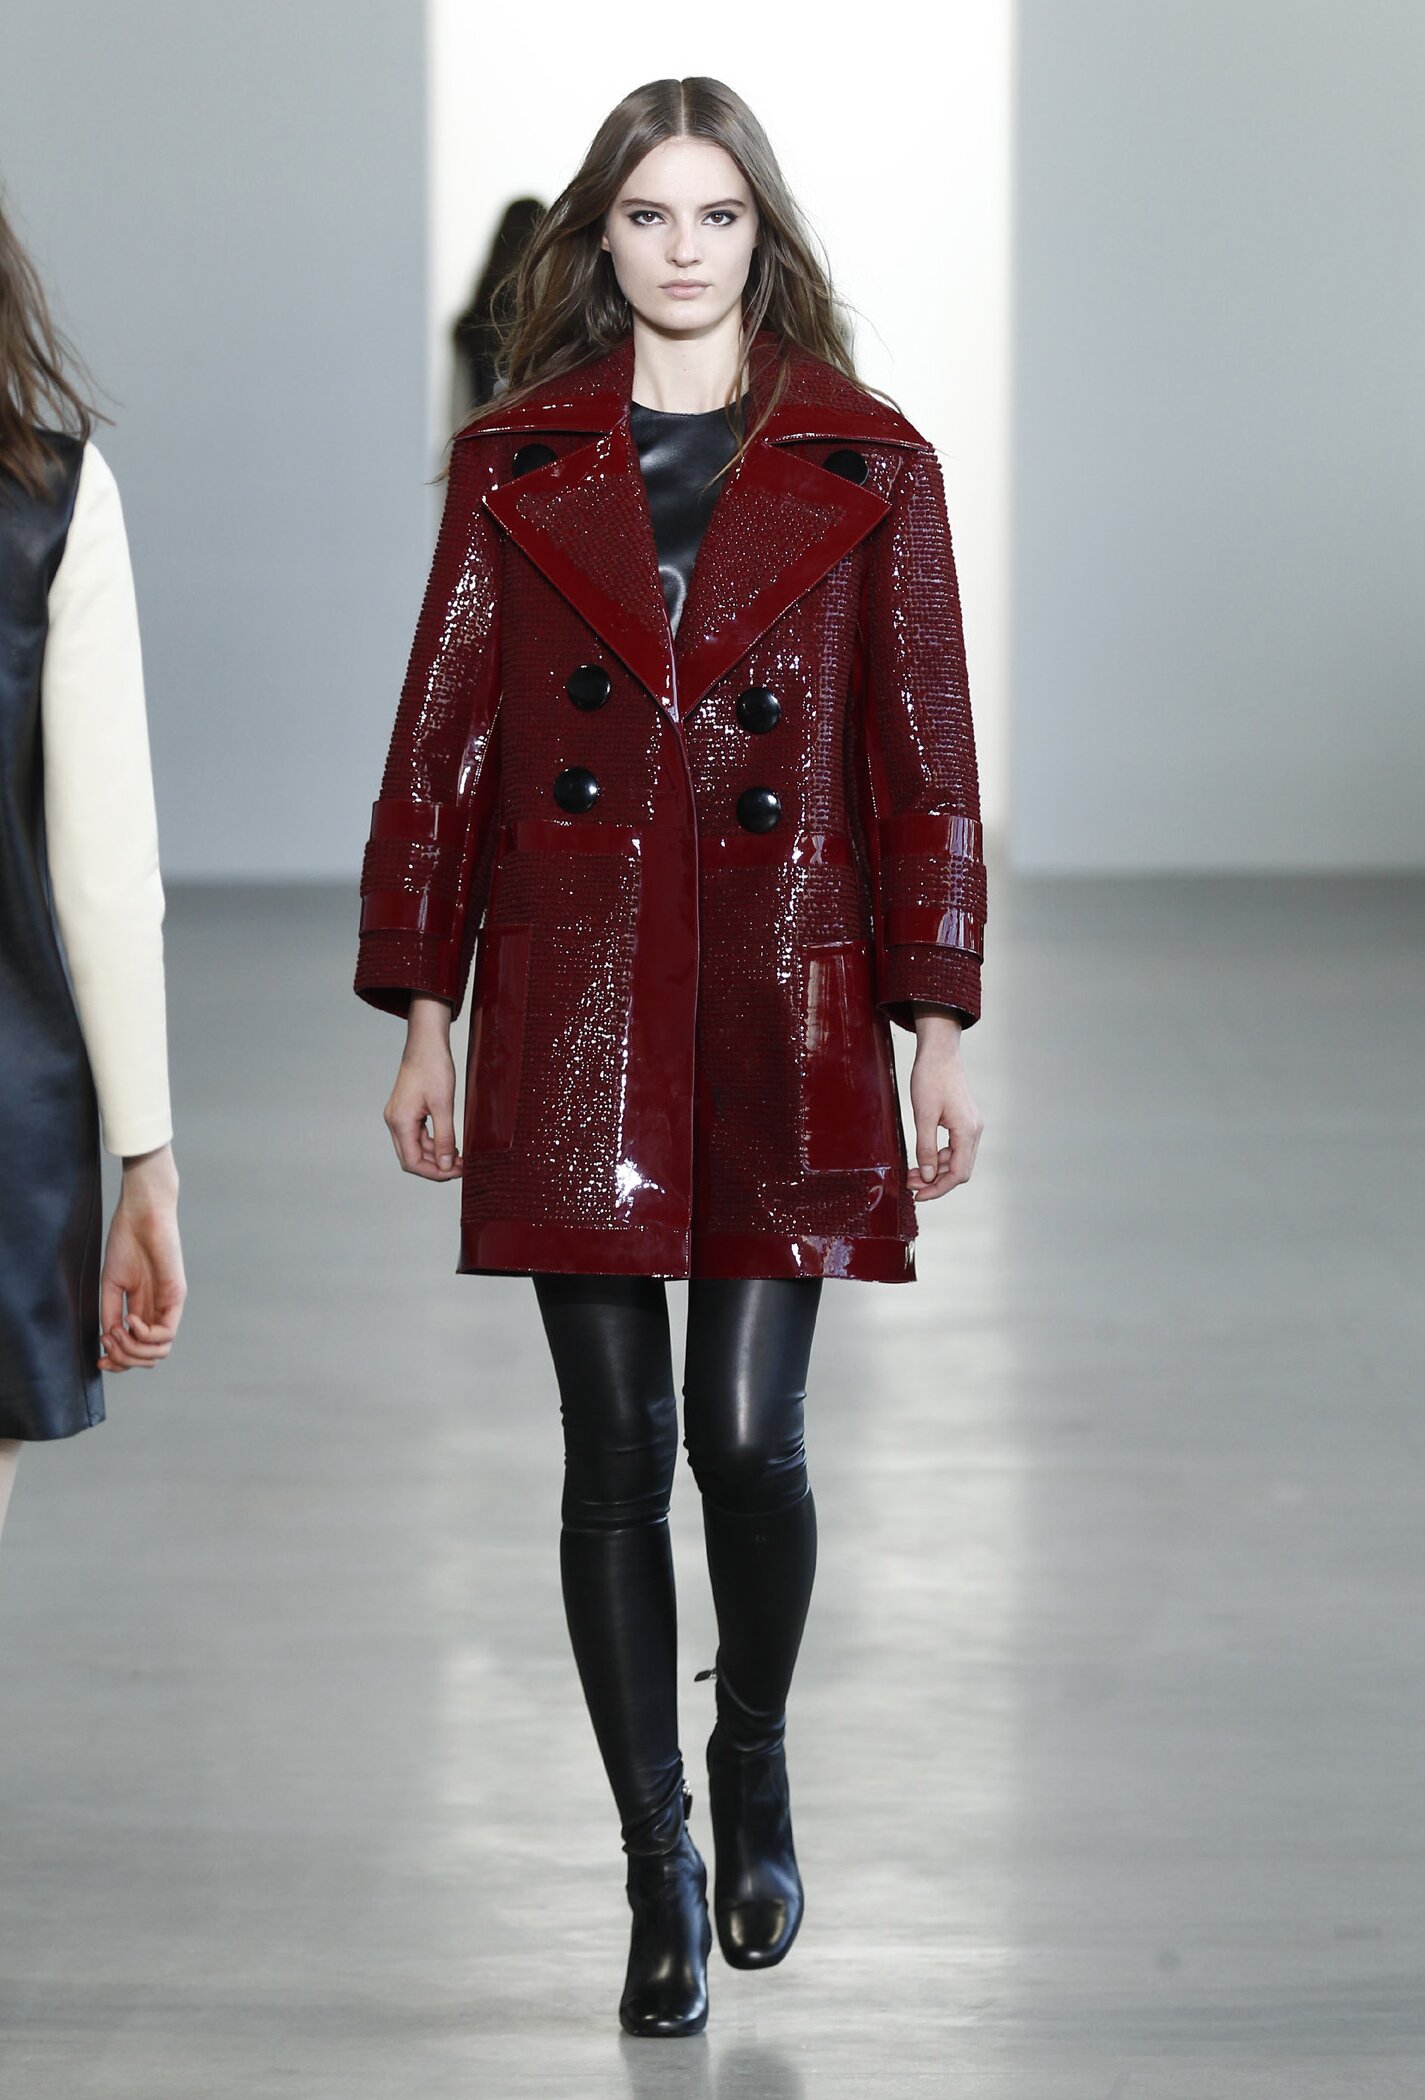 CALVIN KLEIN COLLECTION WOMEN’S FALL 2015 | The Skinny Beep